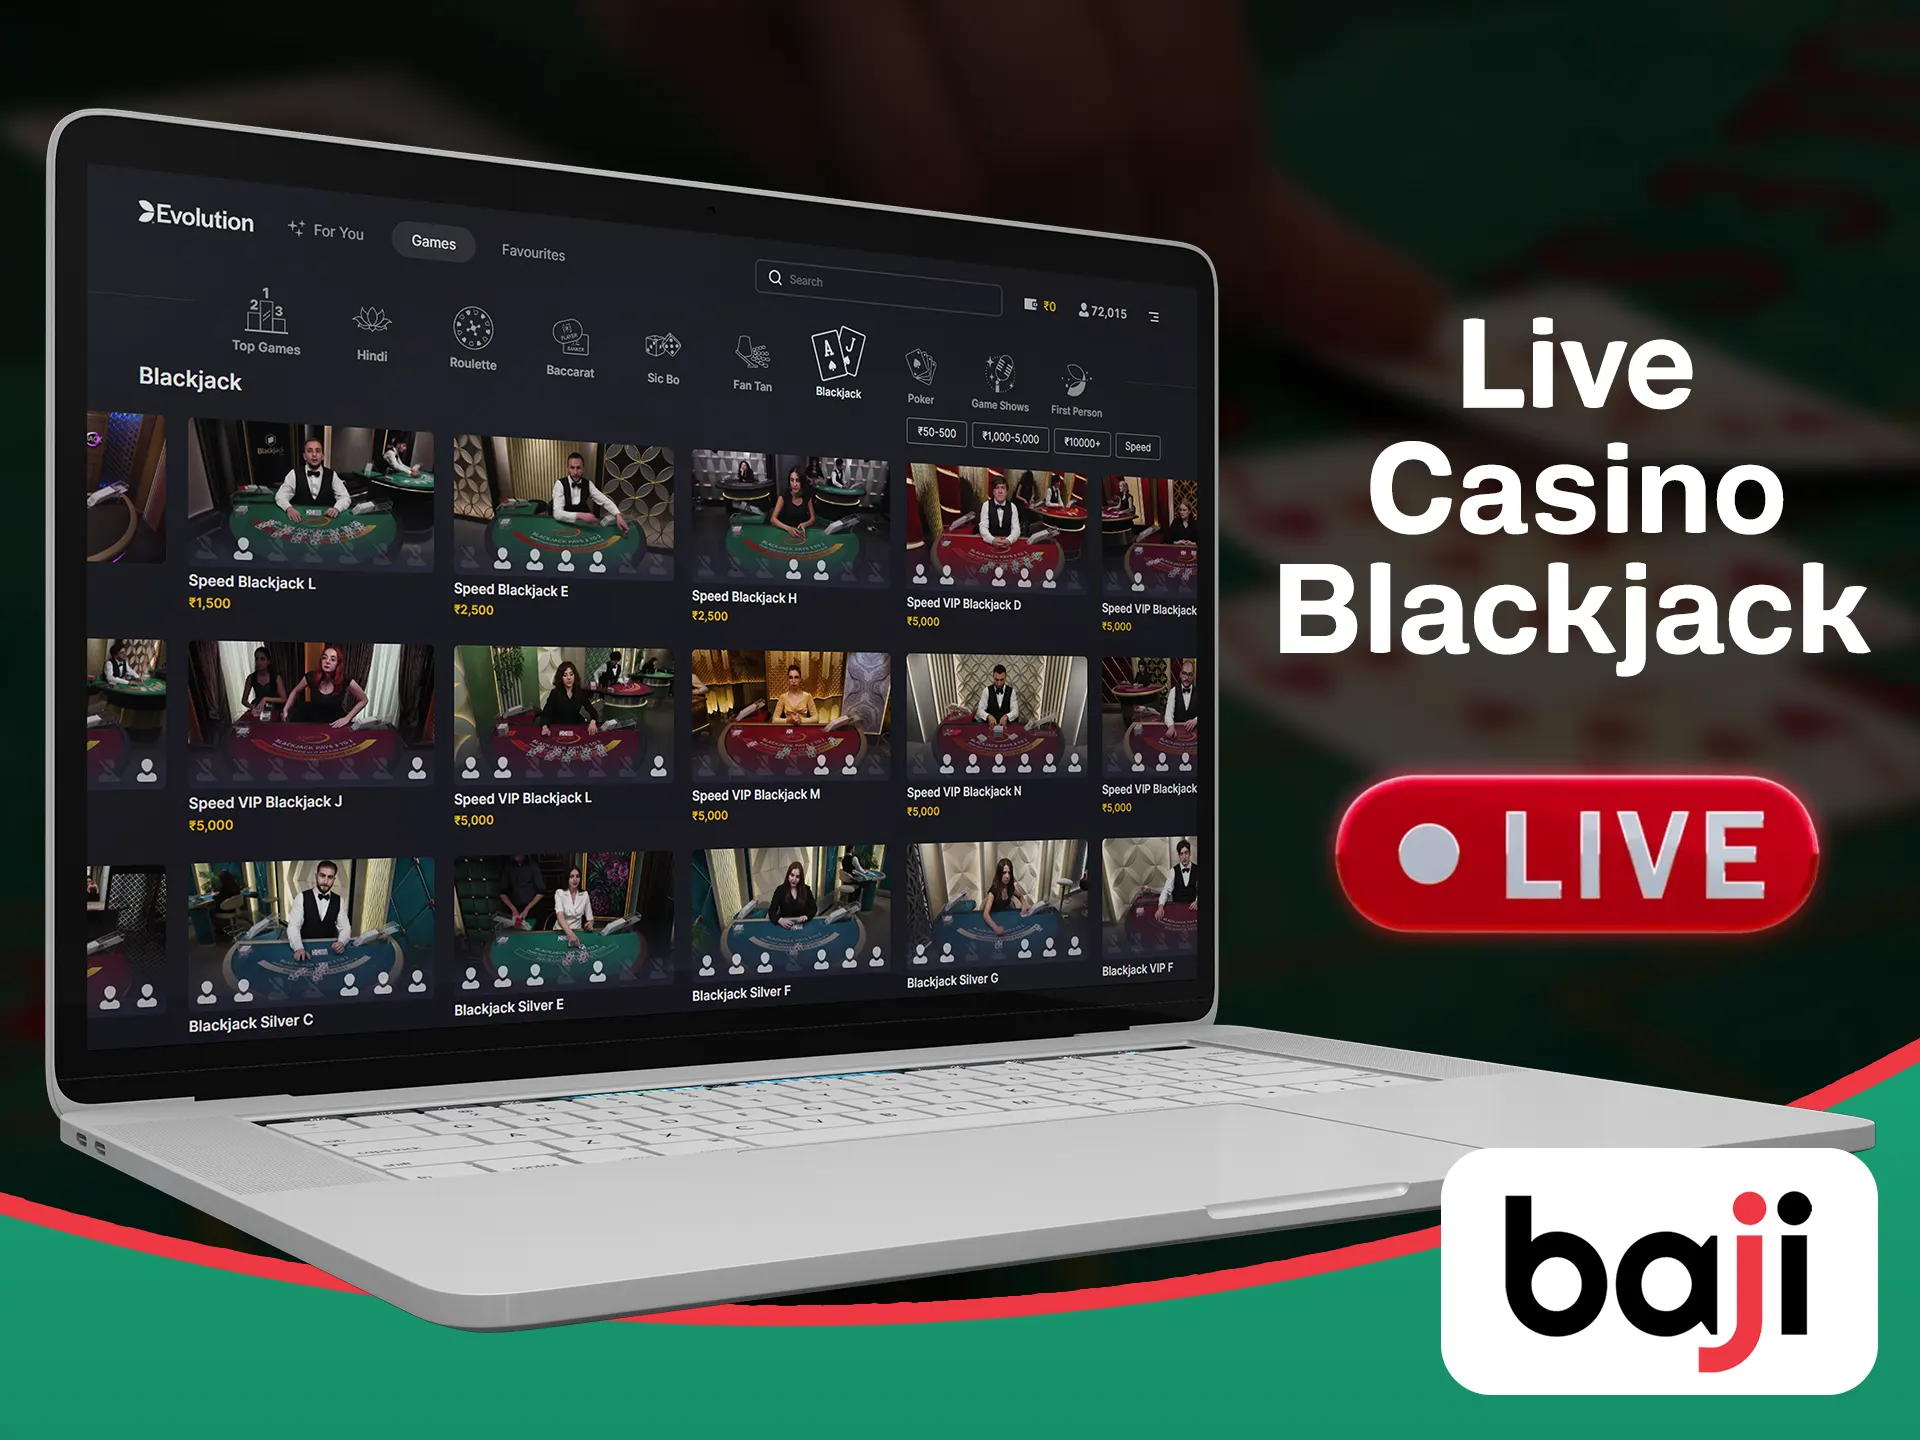 Play blackjack games in a live format at the Baji.